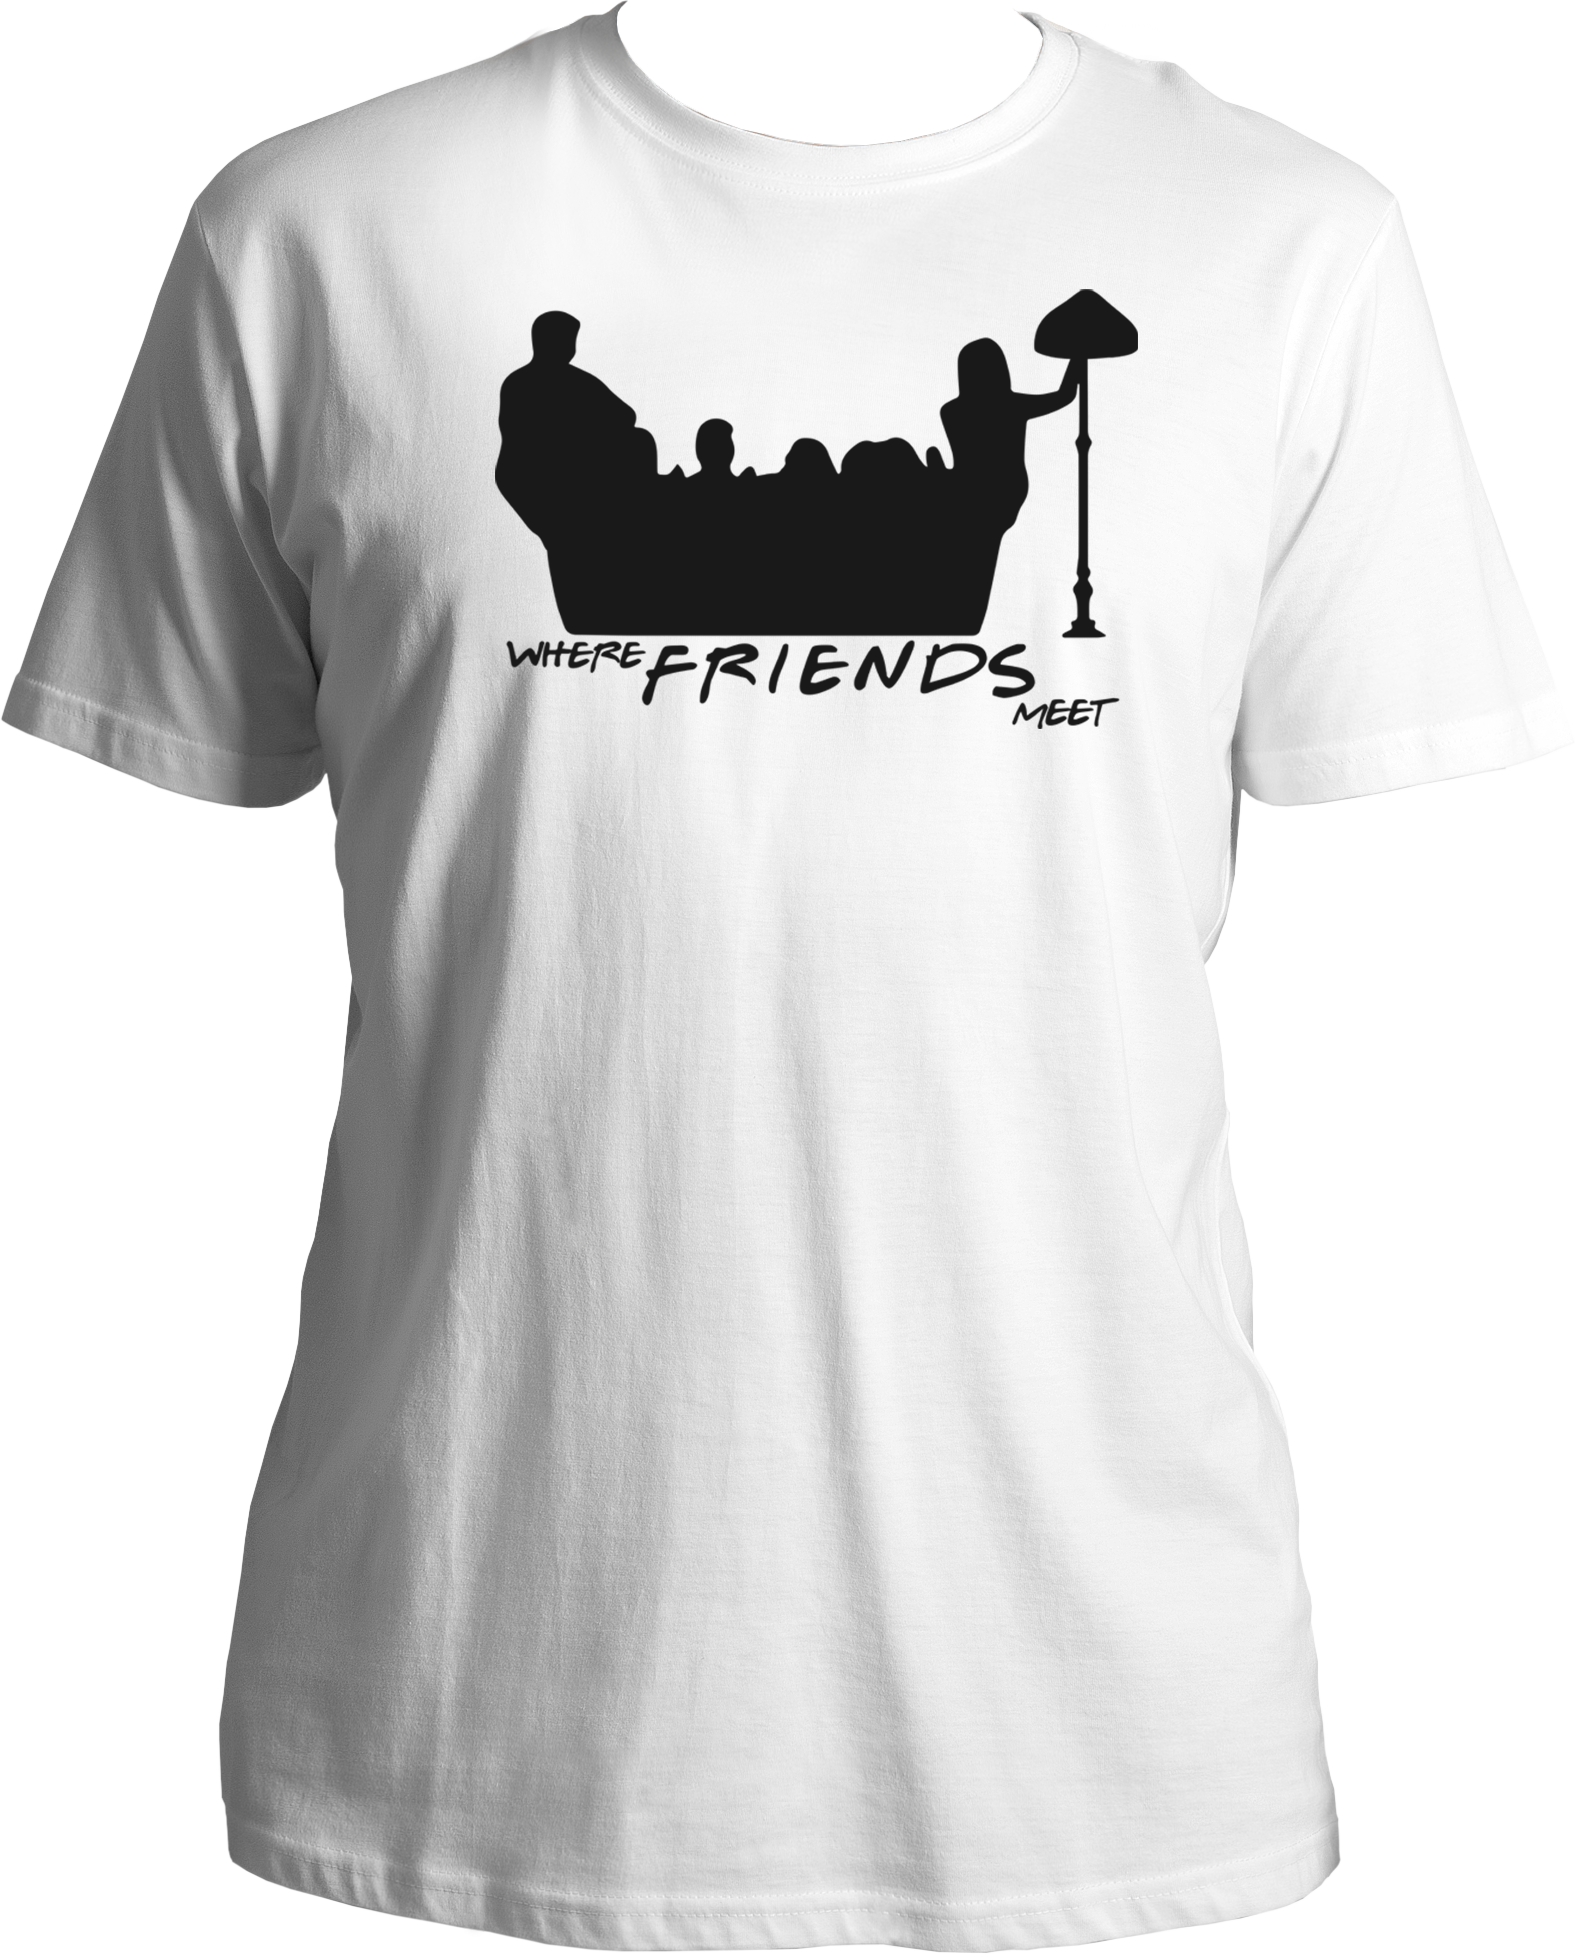 Introducing our exclusive collection of Round Neck Cotton T-Shirts, featuring iconic designs inspired by the beloved TV show F.R.I.E.N.D.S. Dive into nostalgia with our specially crafted tees that pay homage to the cherished moments shared by Ross, Phoebe, Monica, Rachel, Chandler, and Joey on the iconic couch at Central Perk.